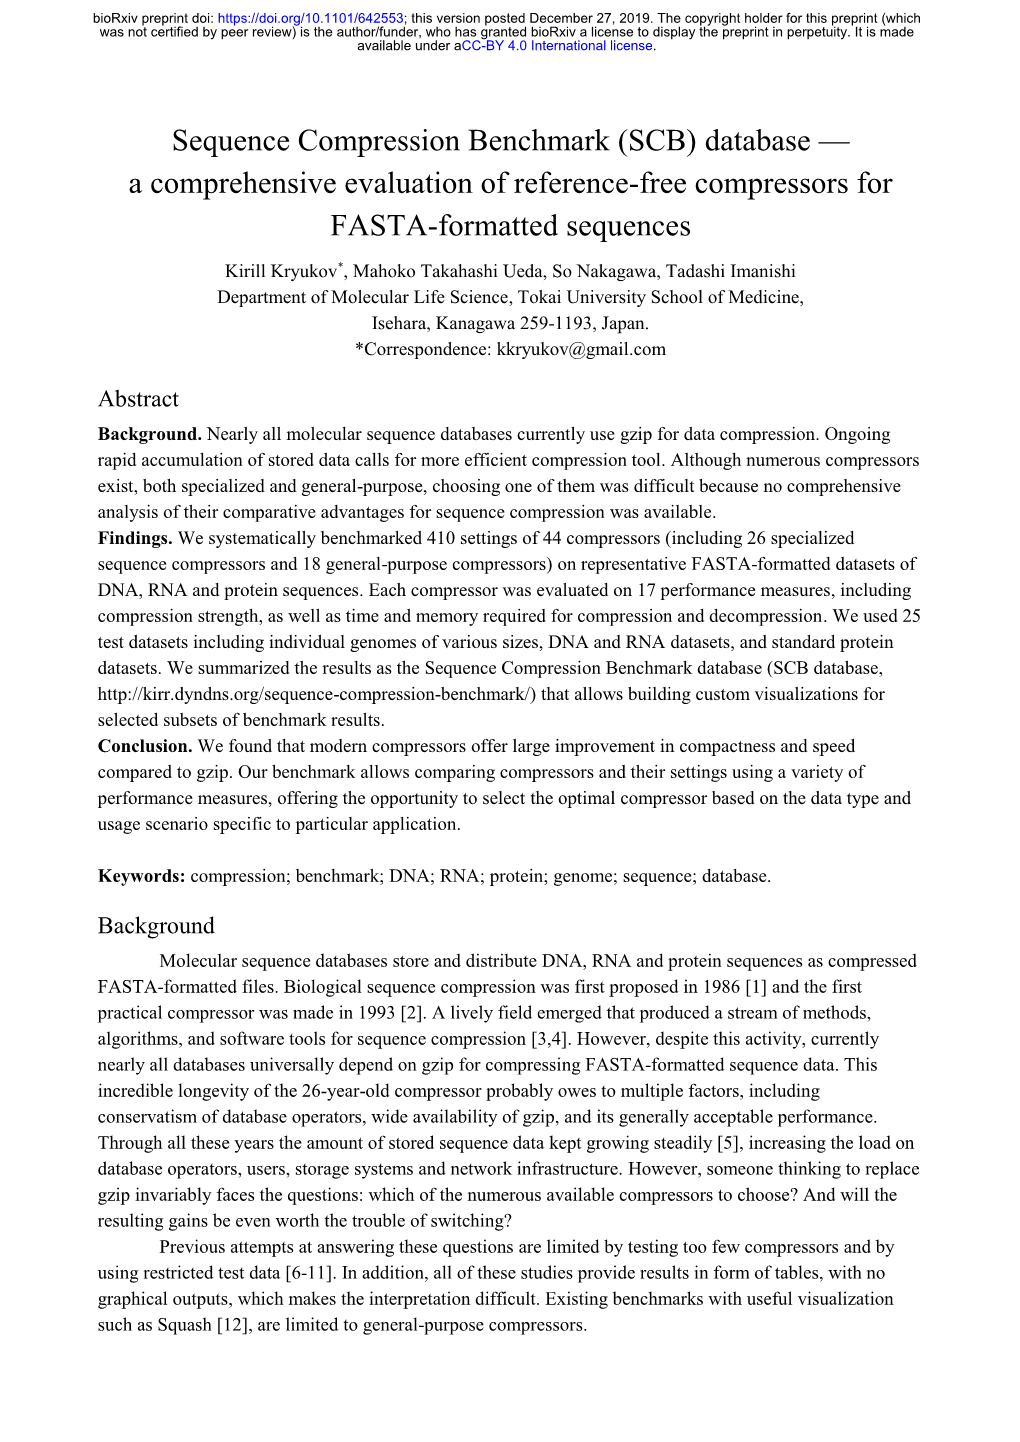 Sequence Compression Benchmark (SCB) Database — a Comprehensive Evaluation of Reference-Free Compressors for FASTA-Formatted Sequences